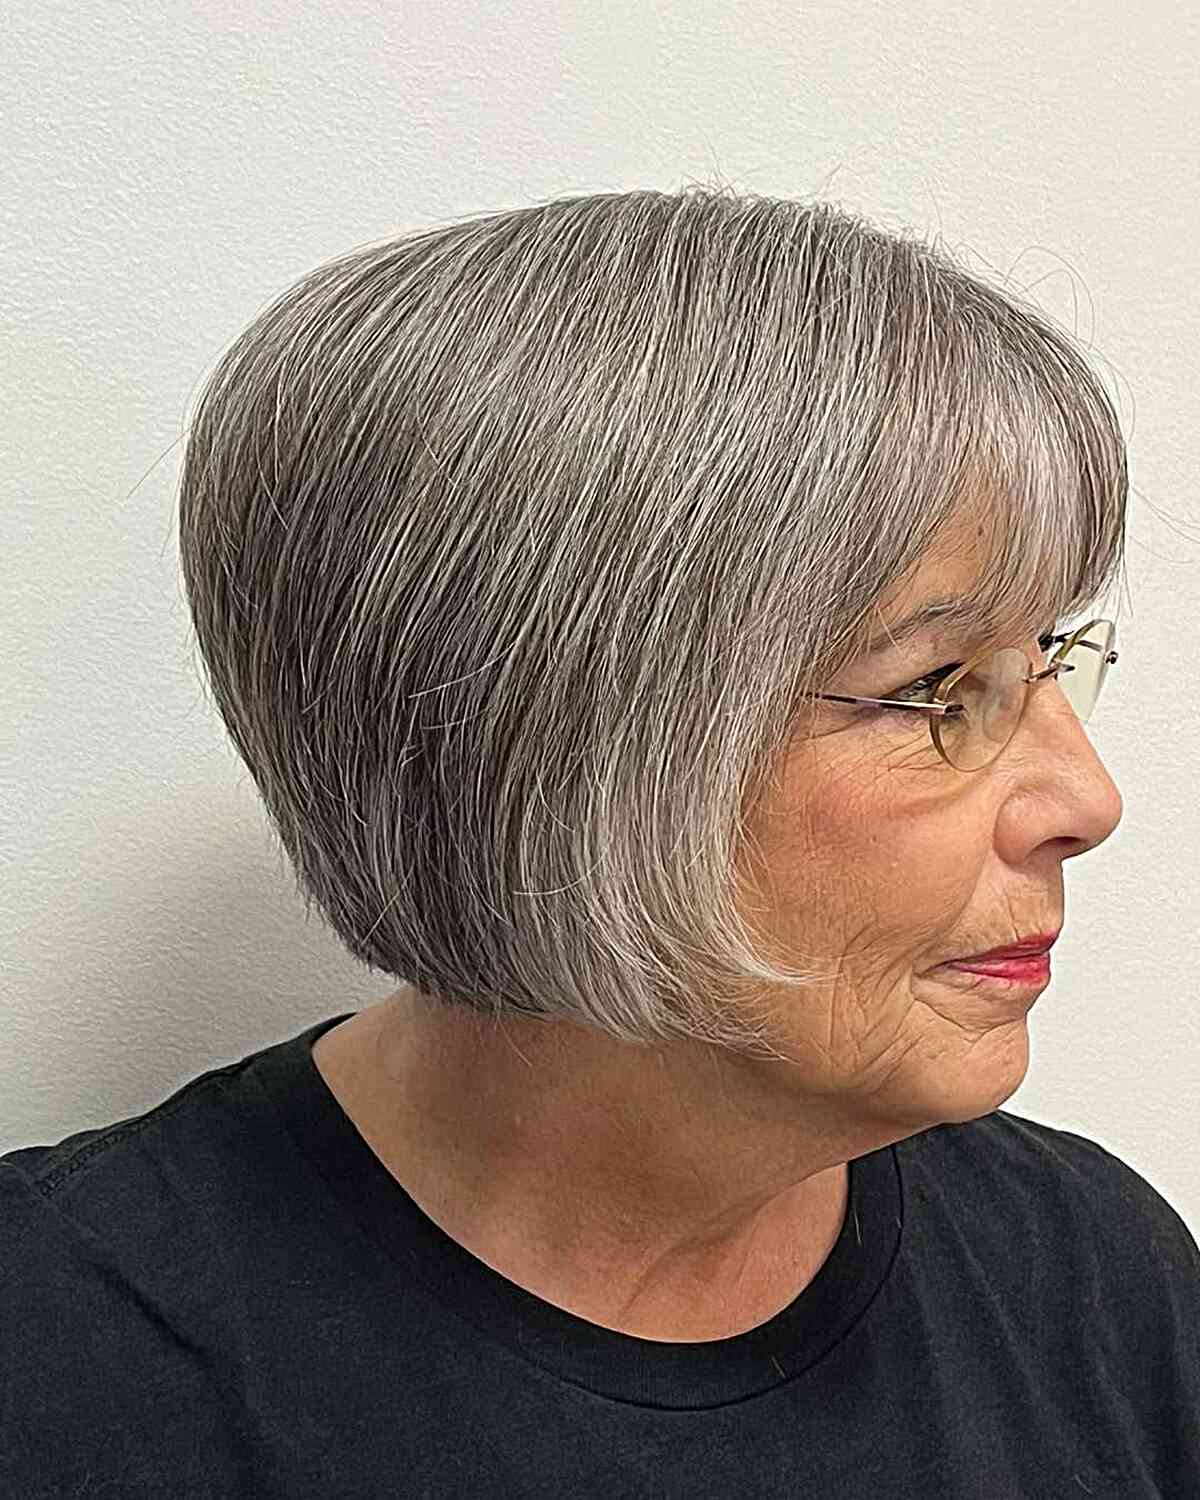 51 Stylish Short Haircuts Women Over 60 Can Pull Off